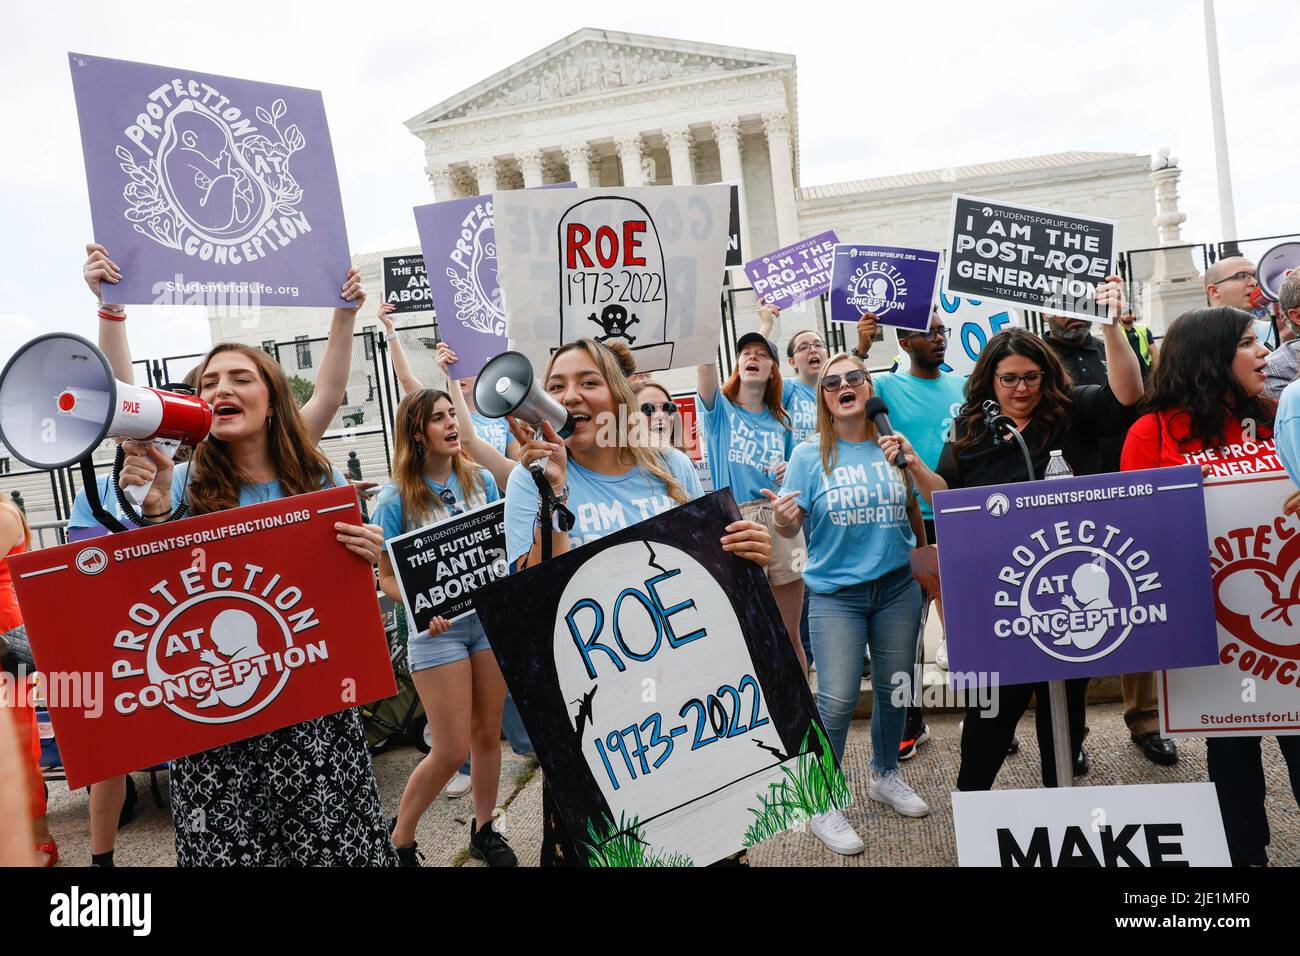 Washington, United States. 24th June, 2022. Abortion-rights activists celebrate after the U.S. Supreme Court overturns Roe v. Wade, ending federal abortion protection and making abortion regulation an issue decided by individual states at the U.S. Supreme Court in Washington, DC on Thursday, June 24, 2022. Photo by Jemal Countess/UPI Credit: UPI/Alamy Live News Stock Photo